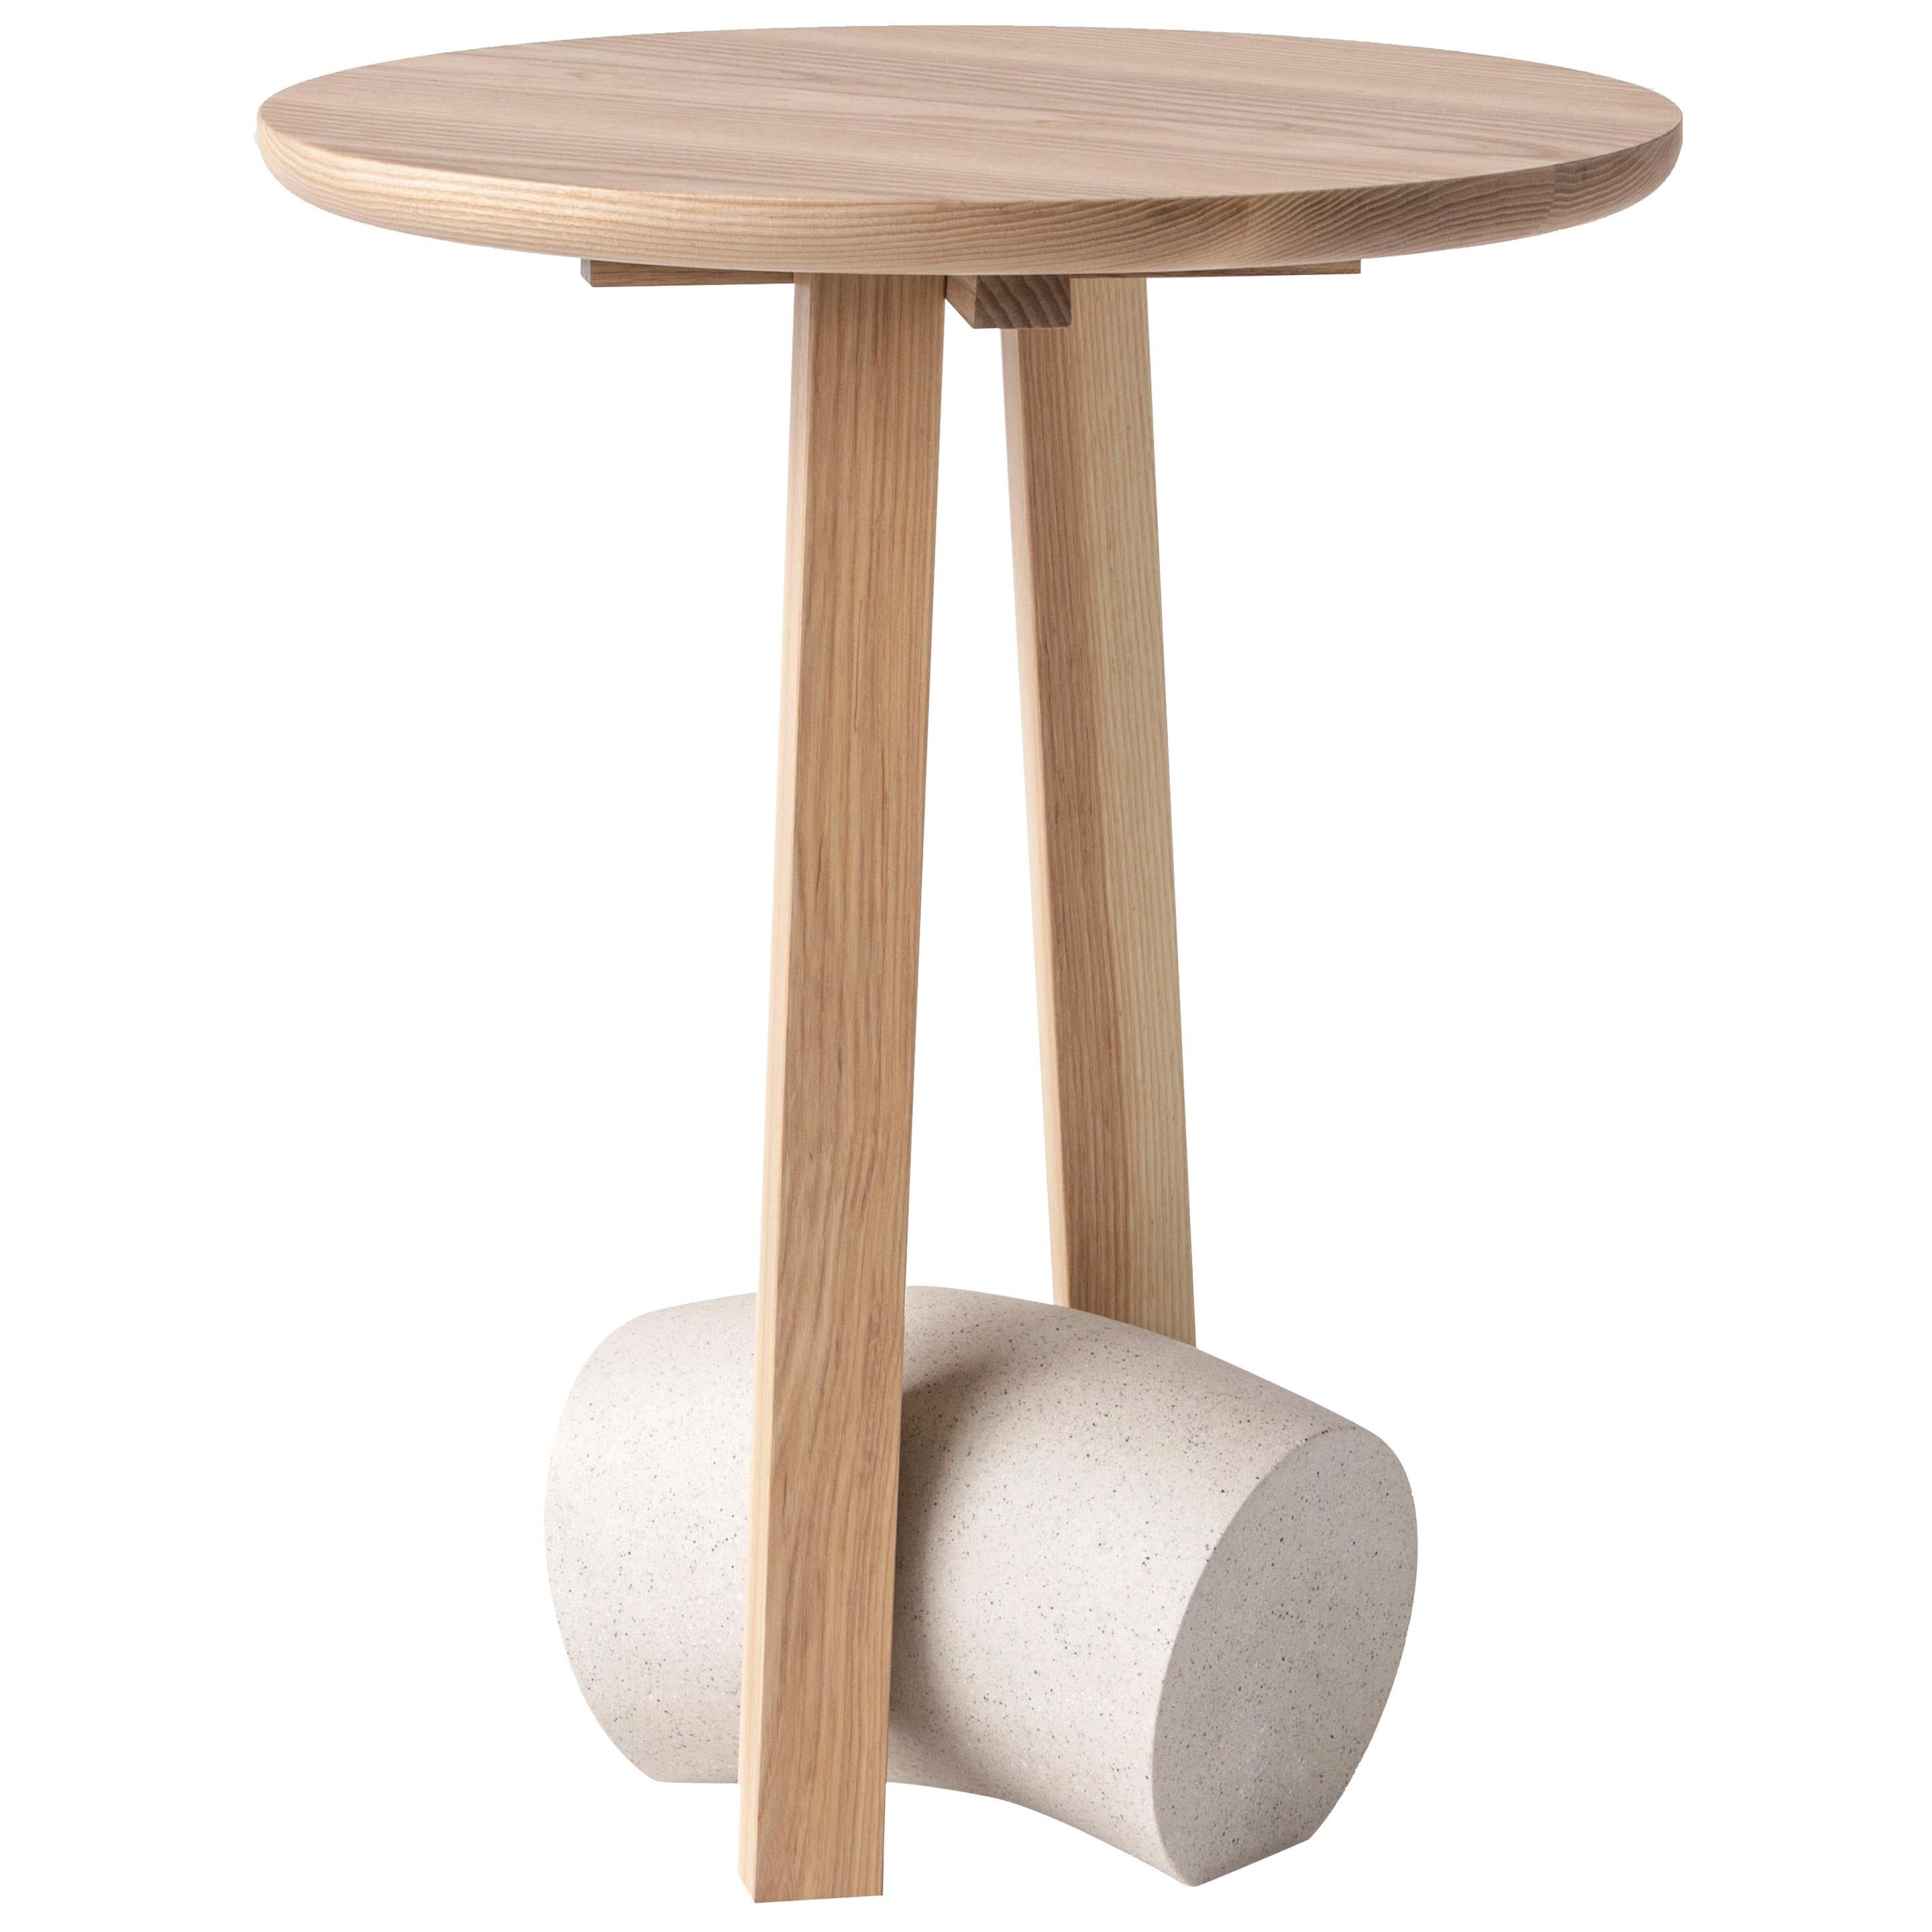 Poise Contemporary Side Table in Solid Ash Hardwood and Concrete For Sale